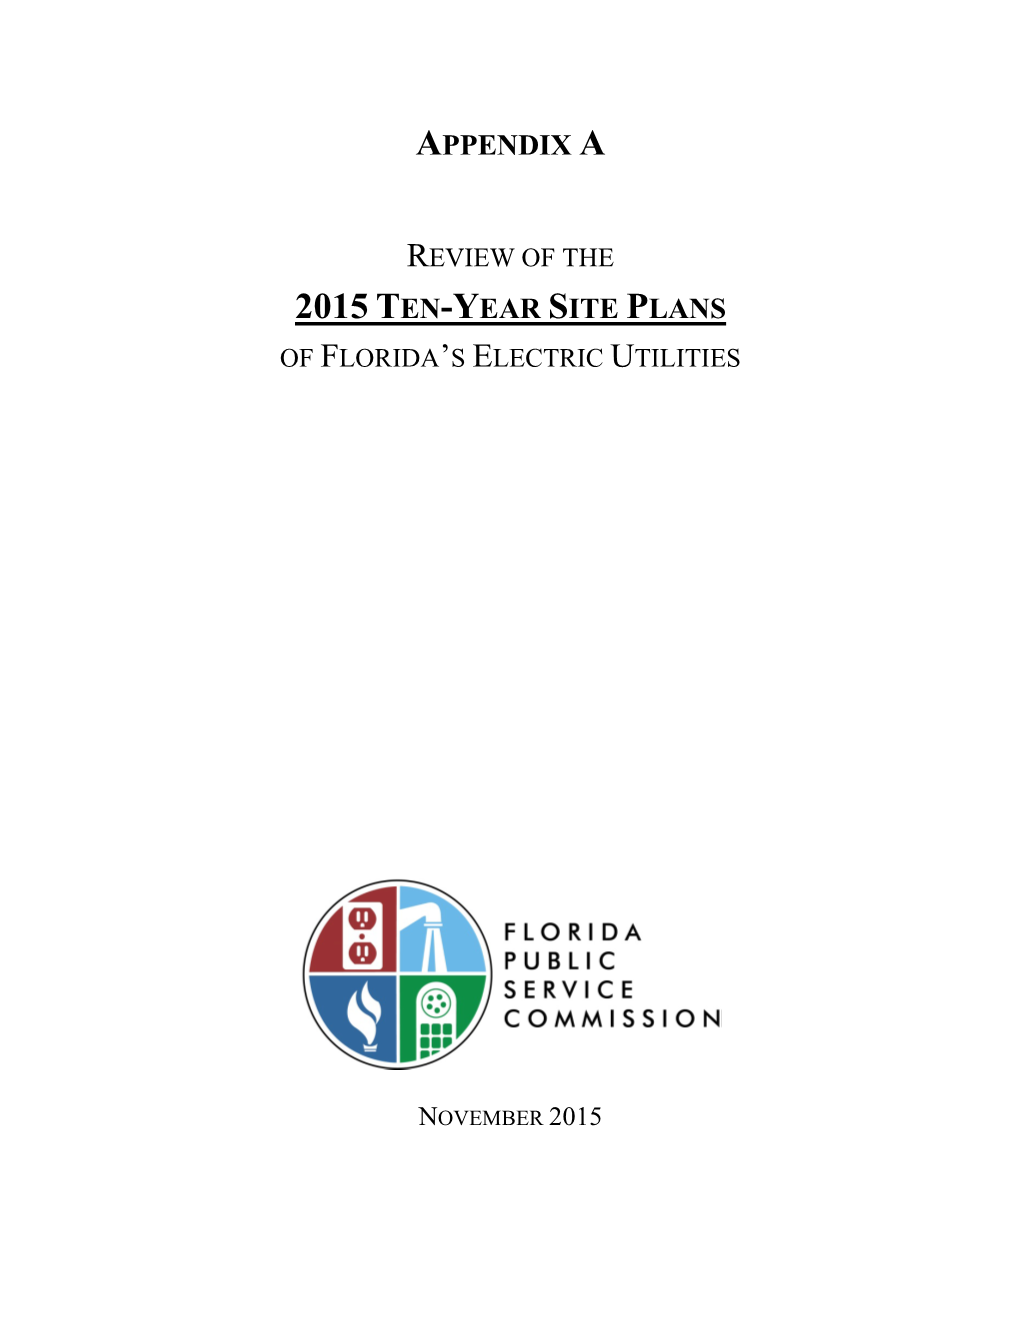 2015 Ten-Year Site Plans of Florida’S Electric Utilities